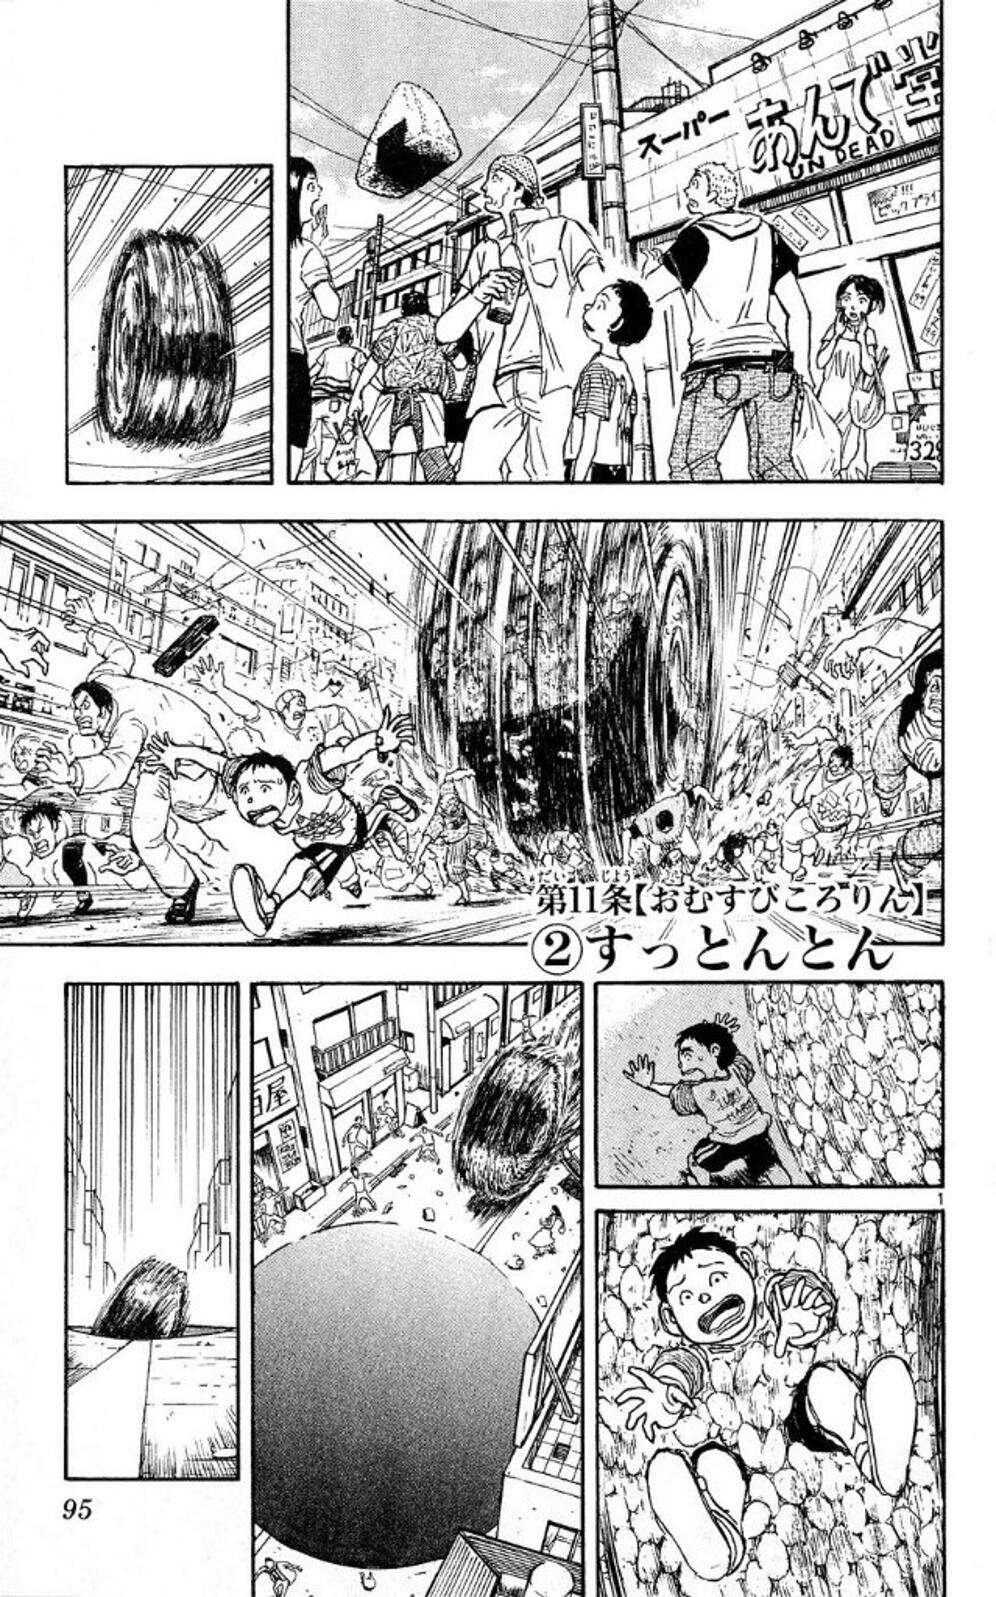 Moonlight Act Vol. 5 Ch. 41 11th Article The Rolling Riceball Part 2